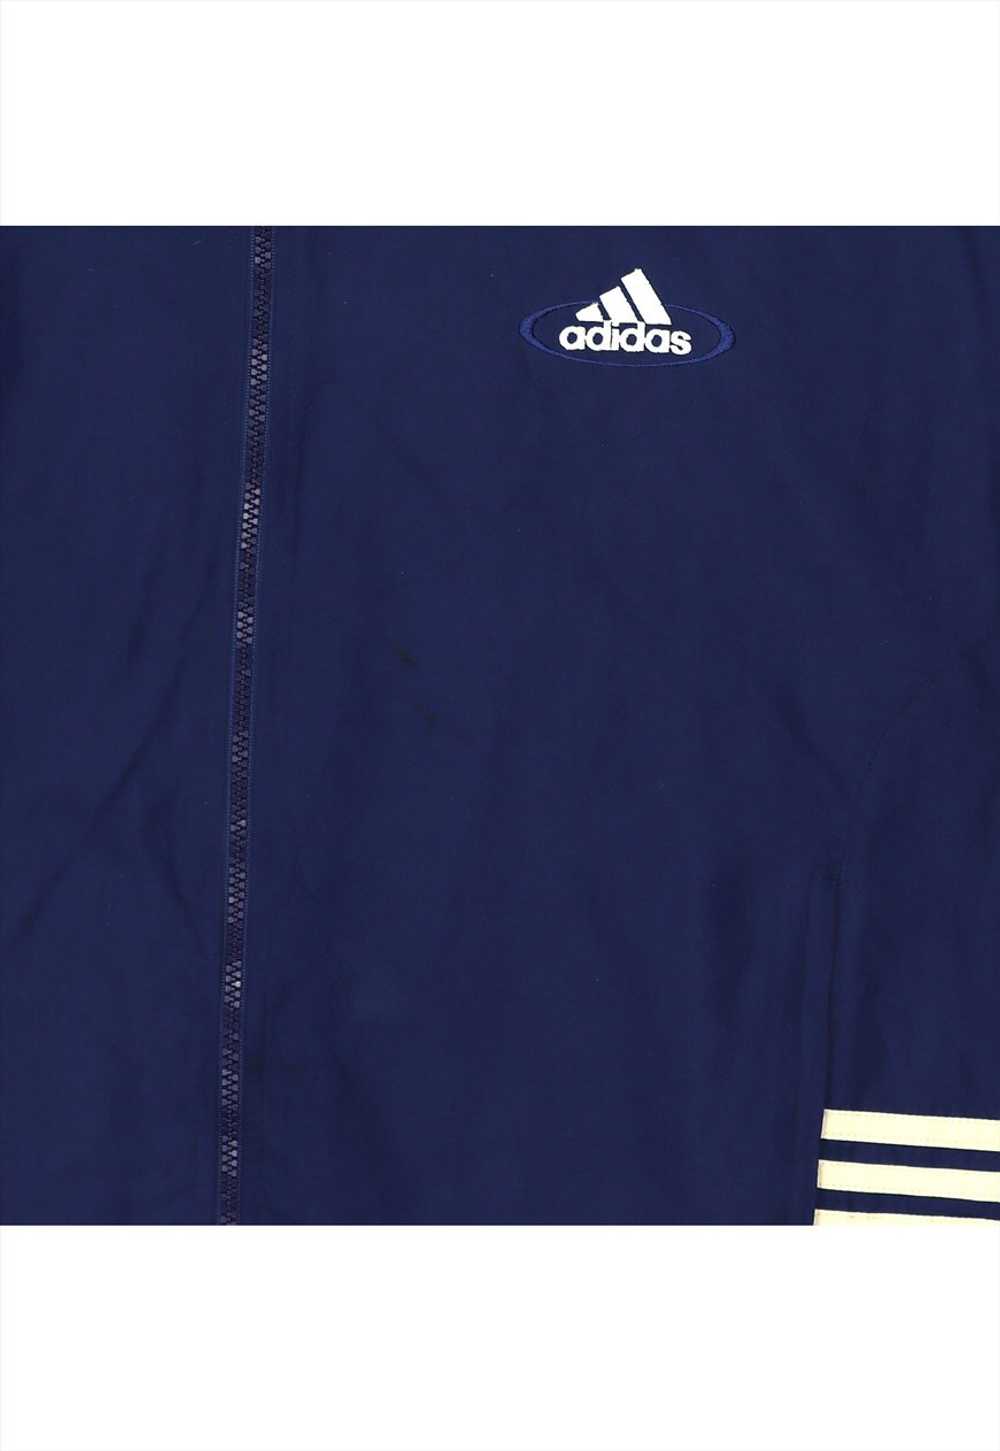 Vintage 90's Adidas Bomber Jacket Spellout Zip Up - image 4